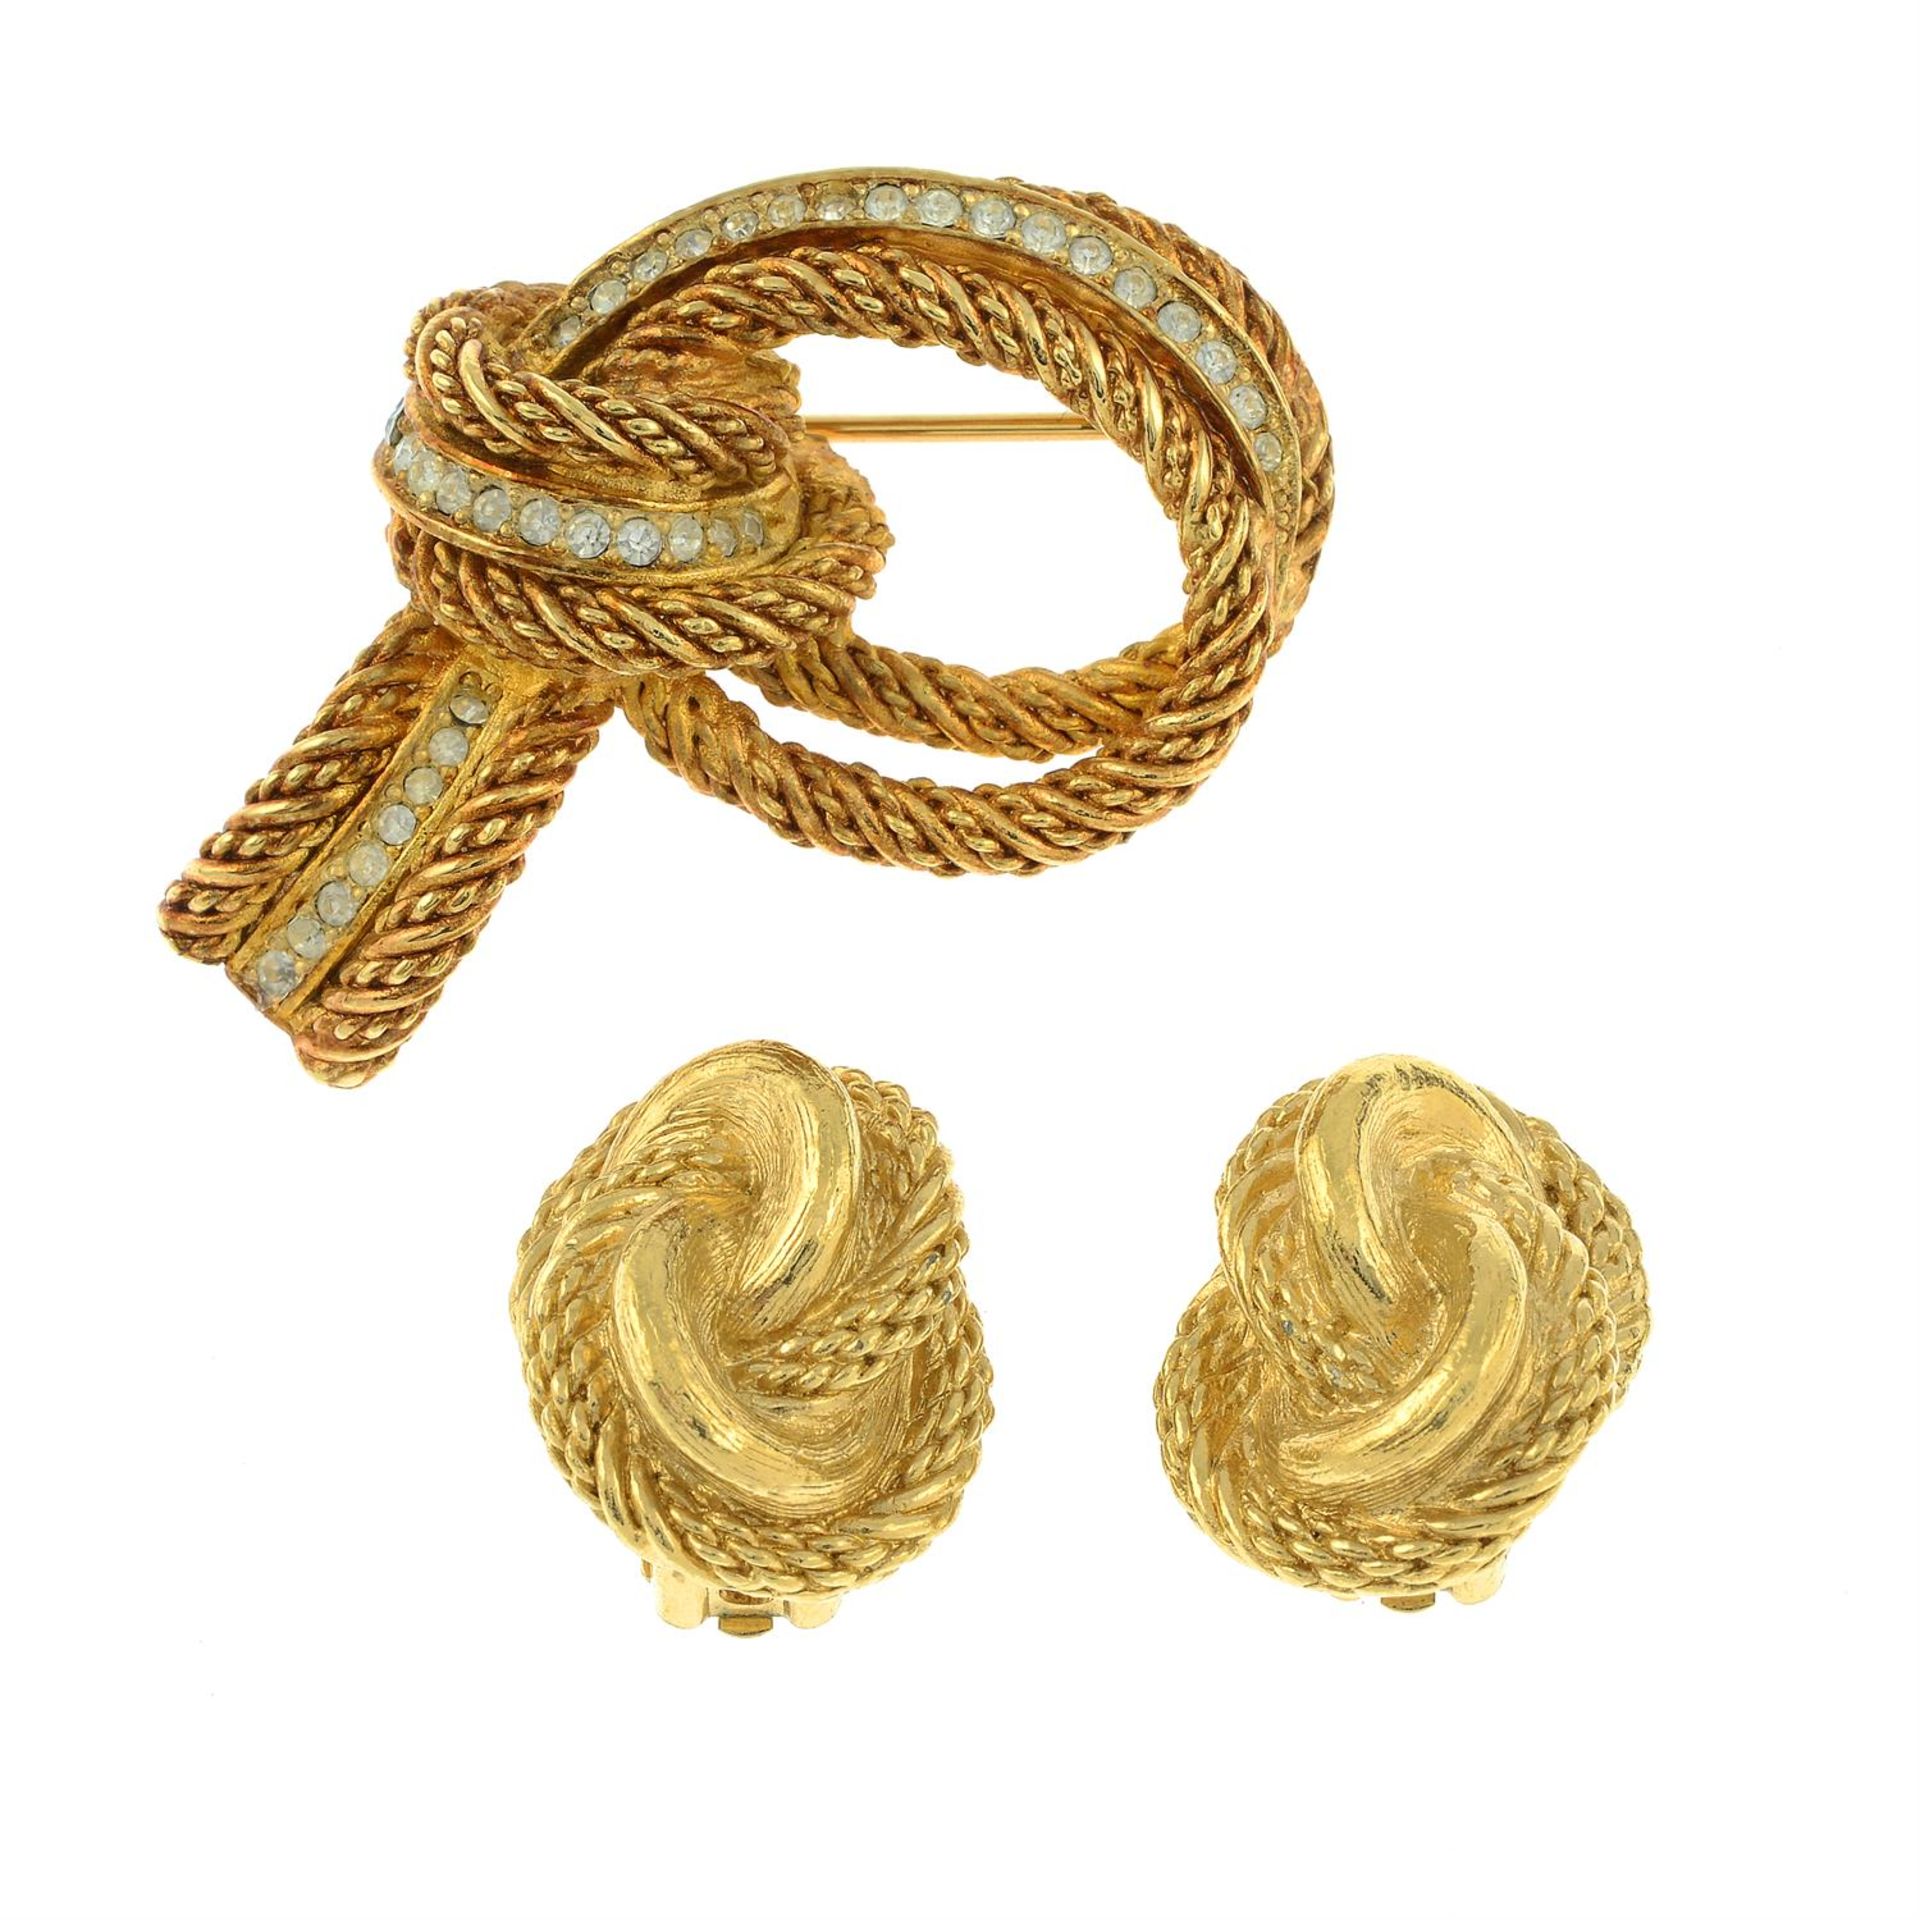 CHRISTIAN DIOR - a knot brooch and a pair of clip-on earrings.